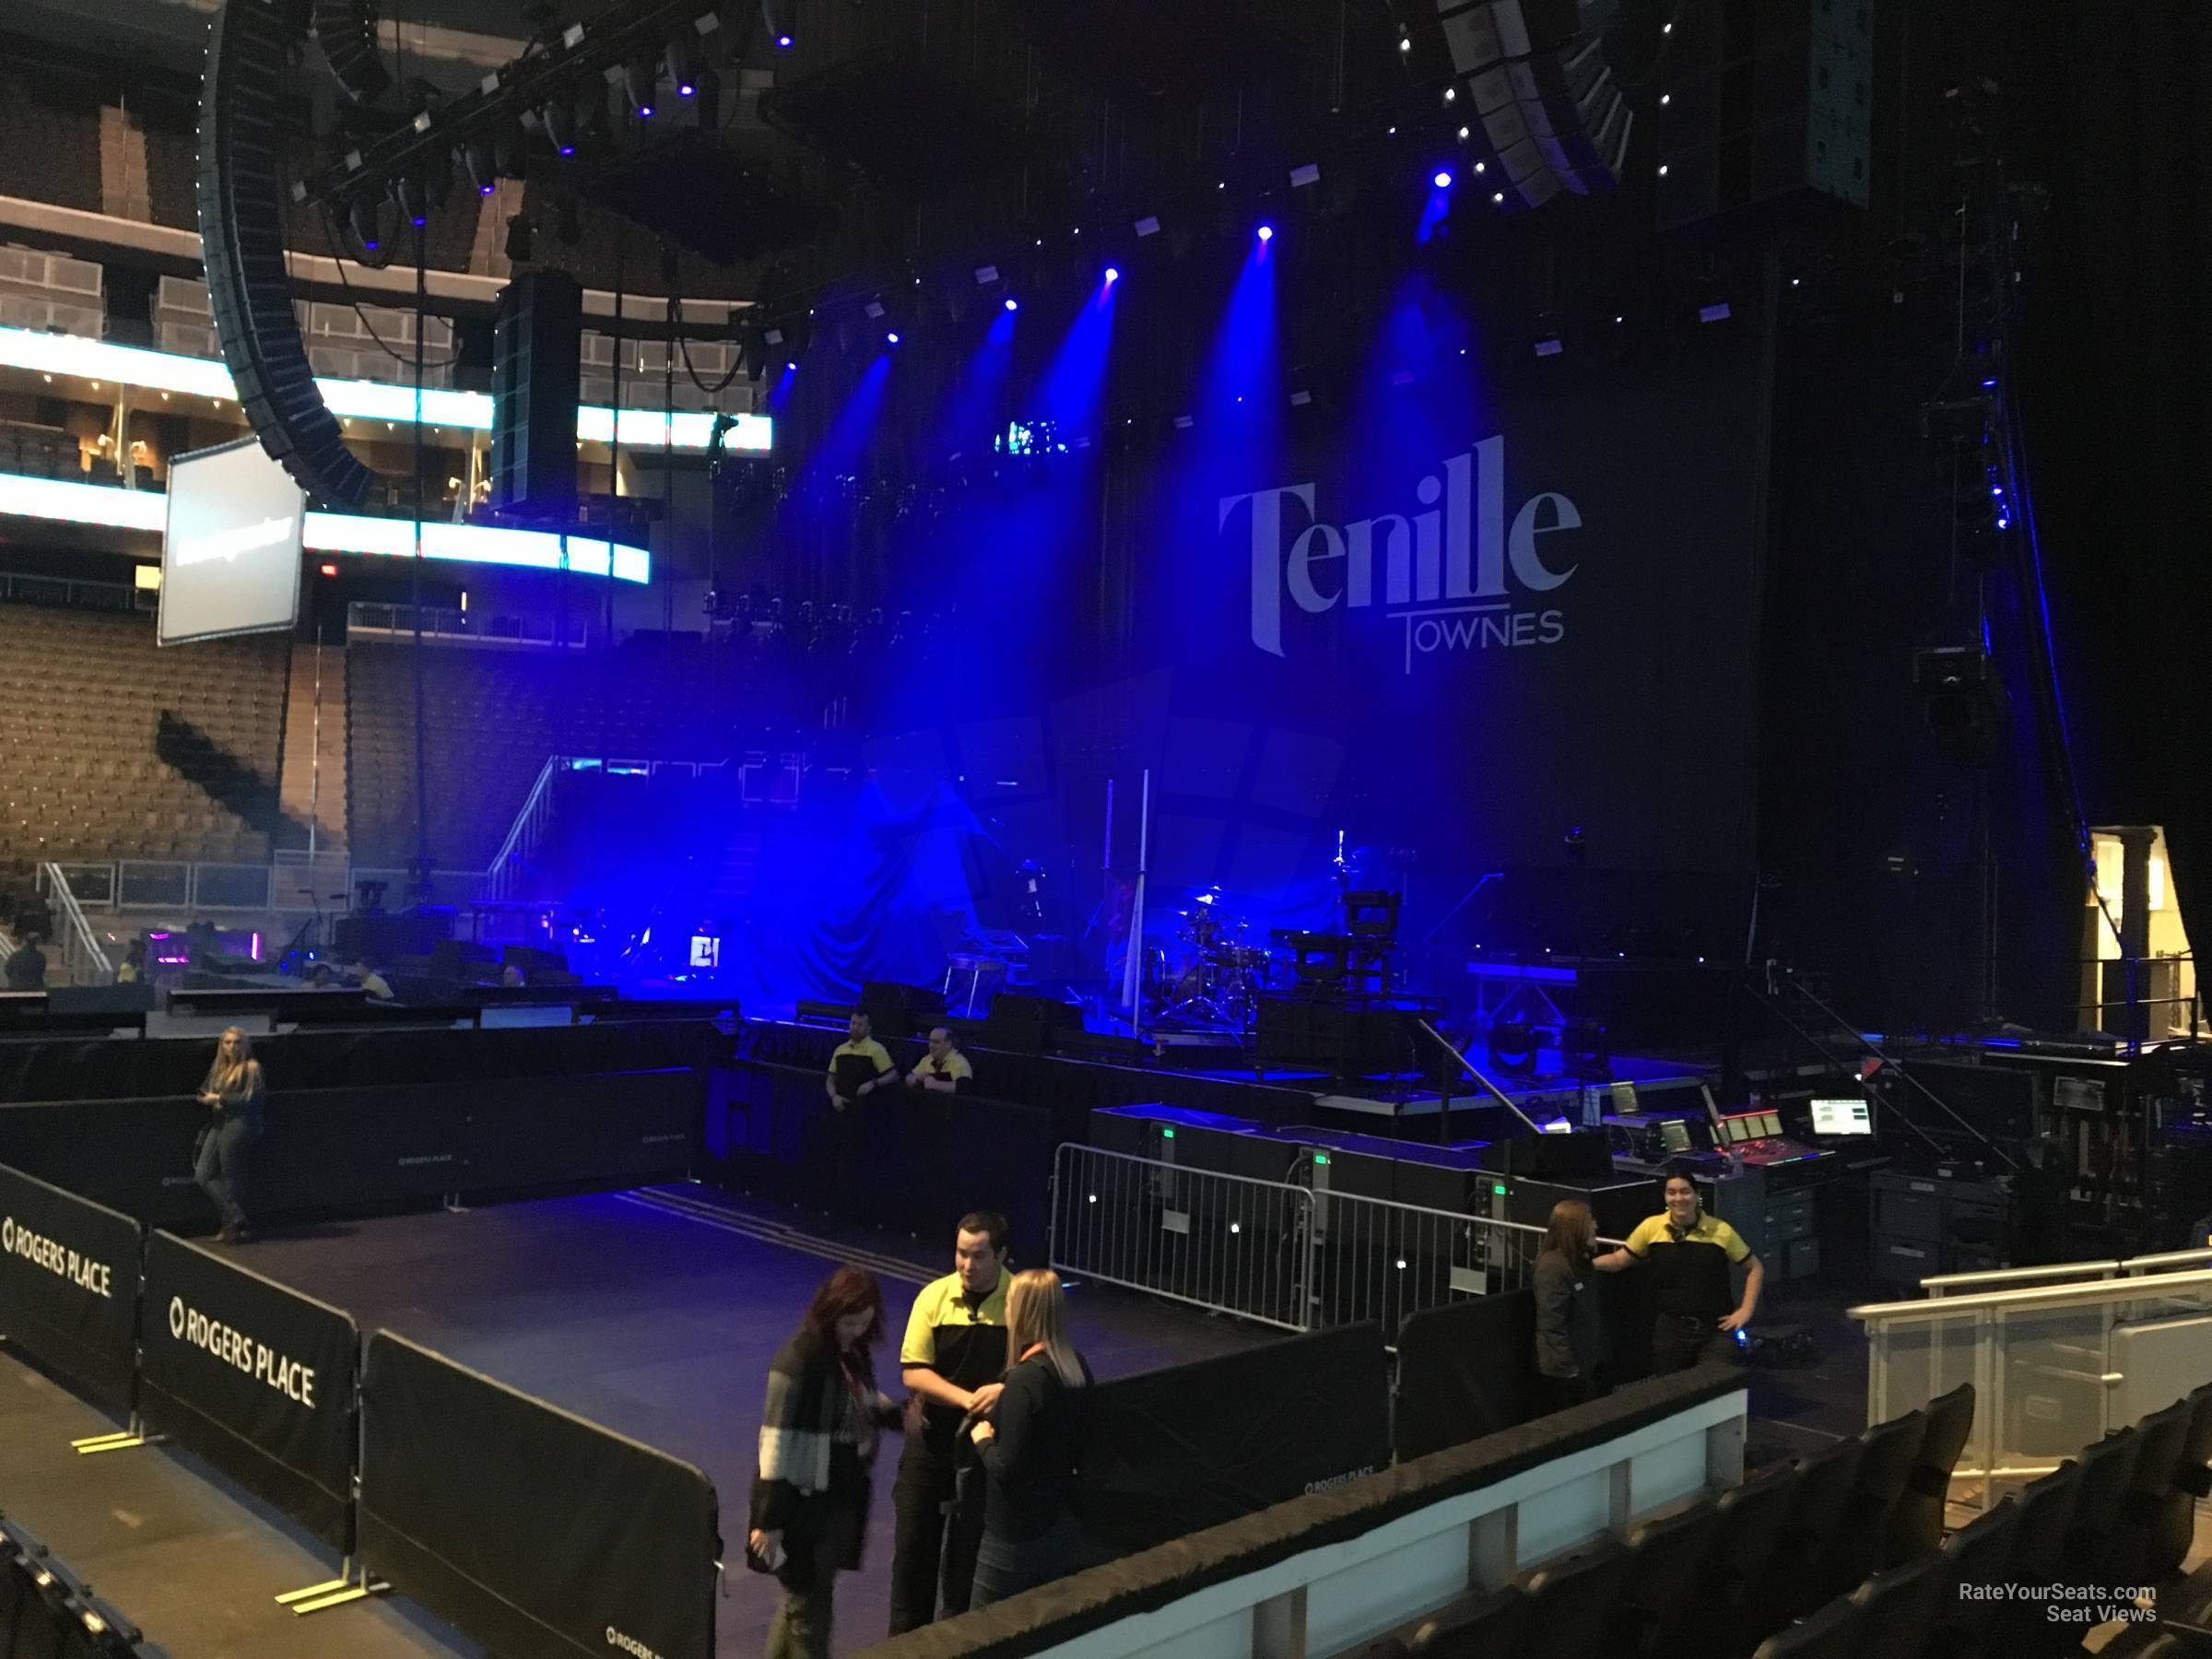 section 101, row 5 seat view  for concert - rogers place